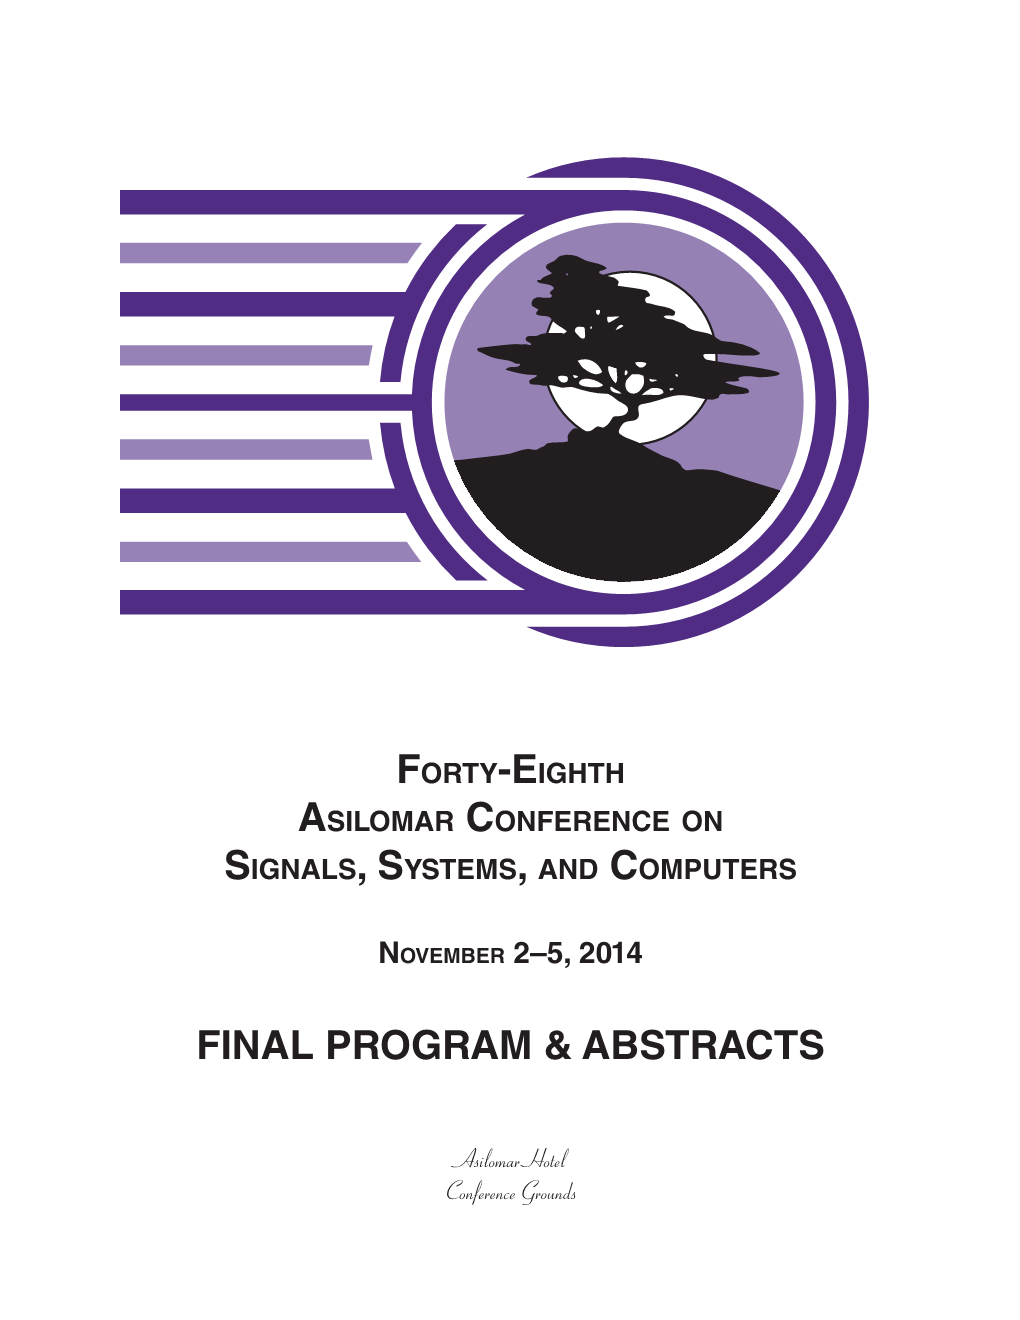 Final Program & Abstracts